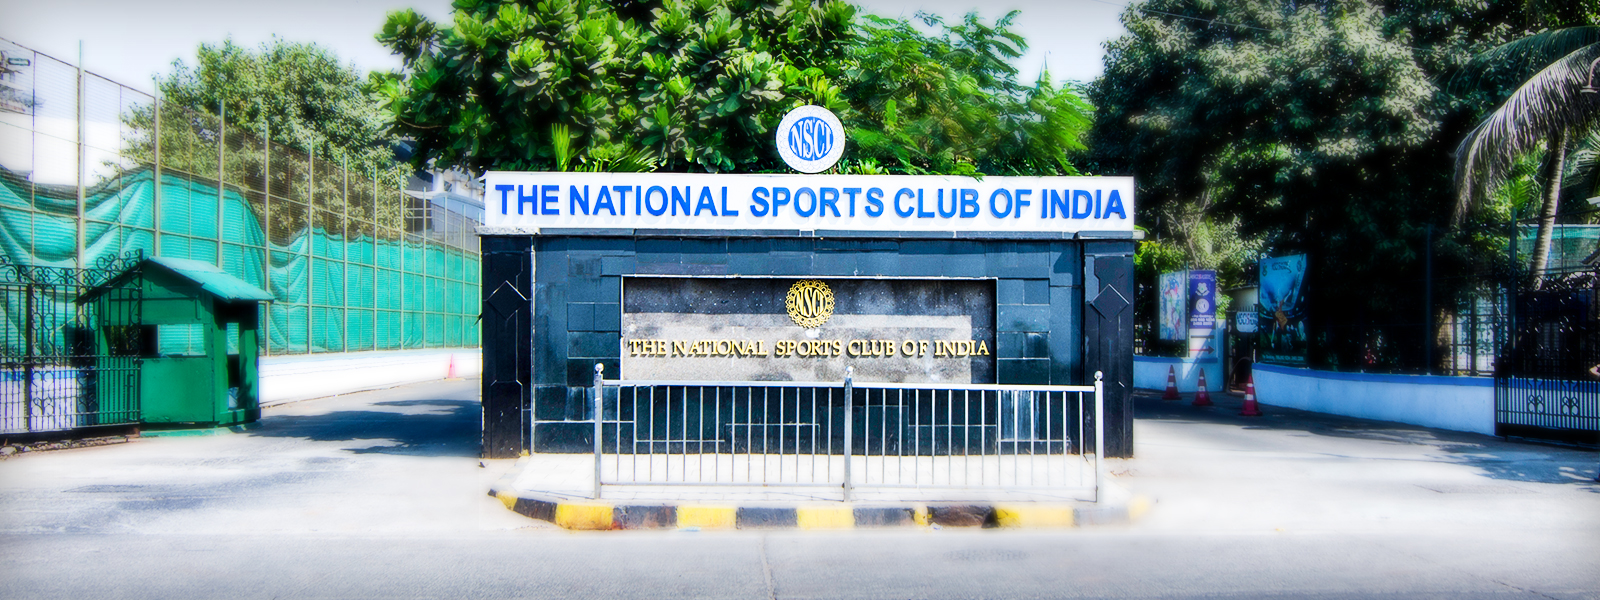 The National Sports Club of India